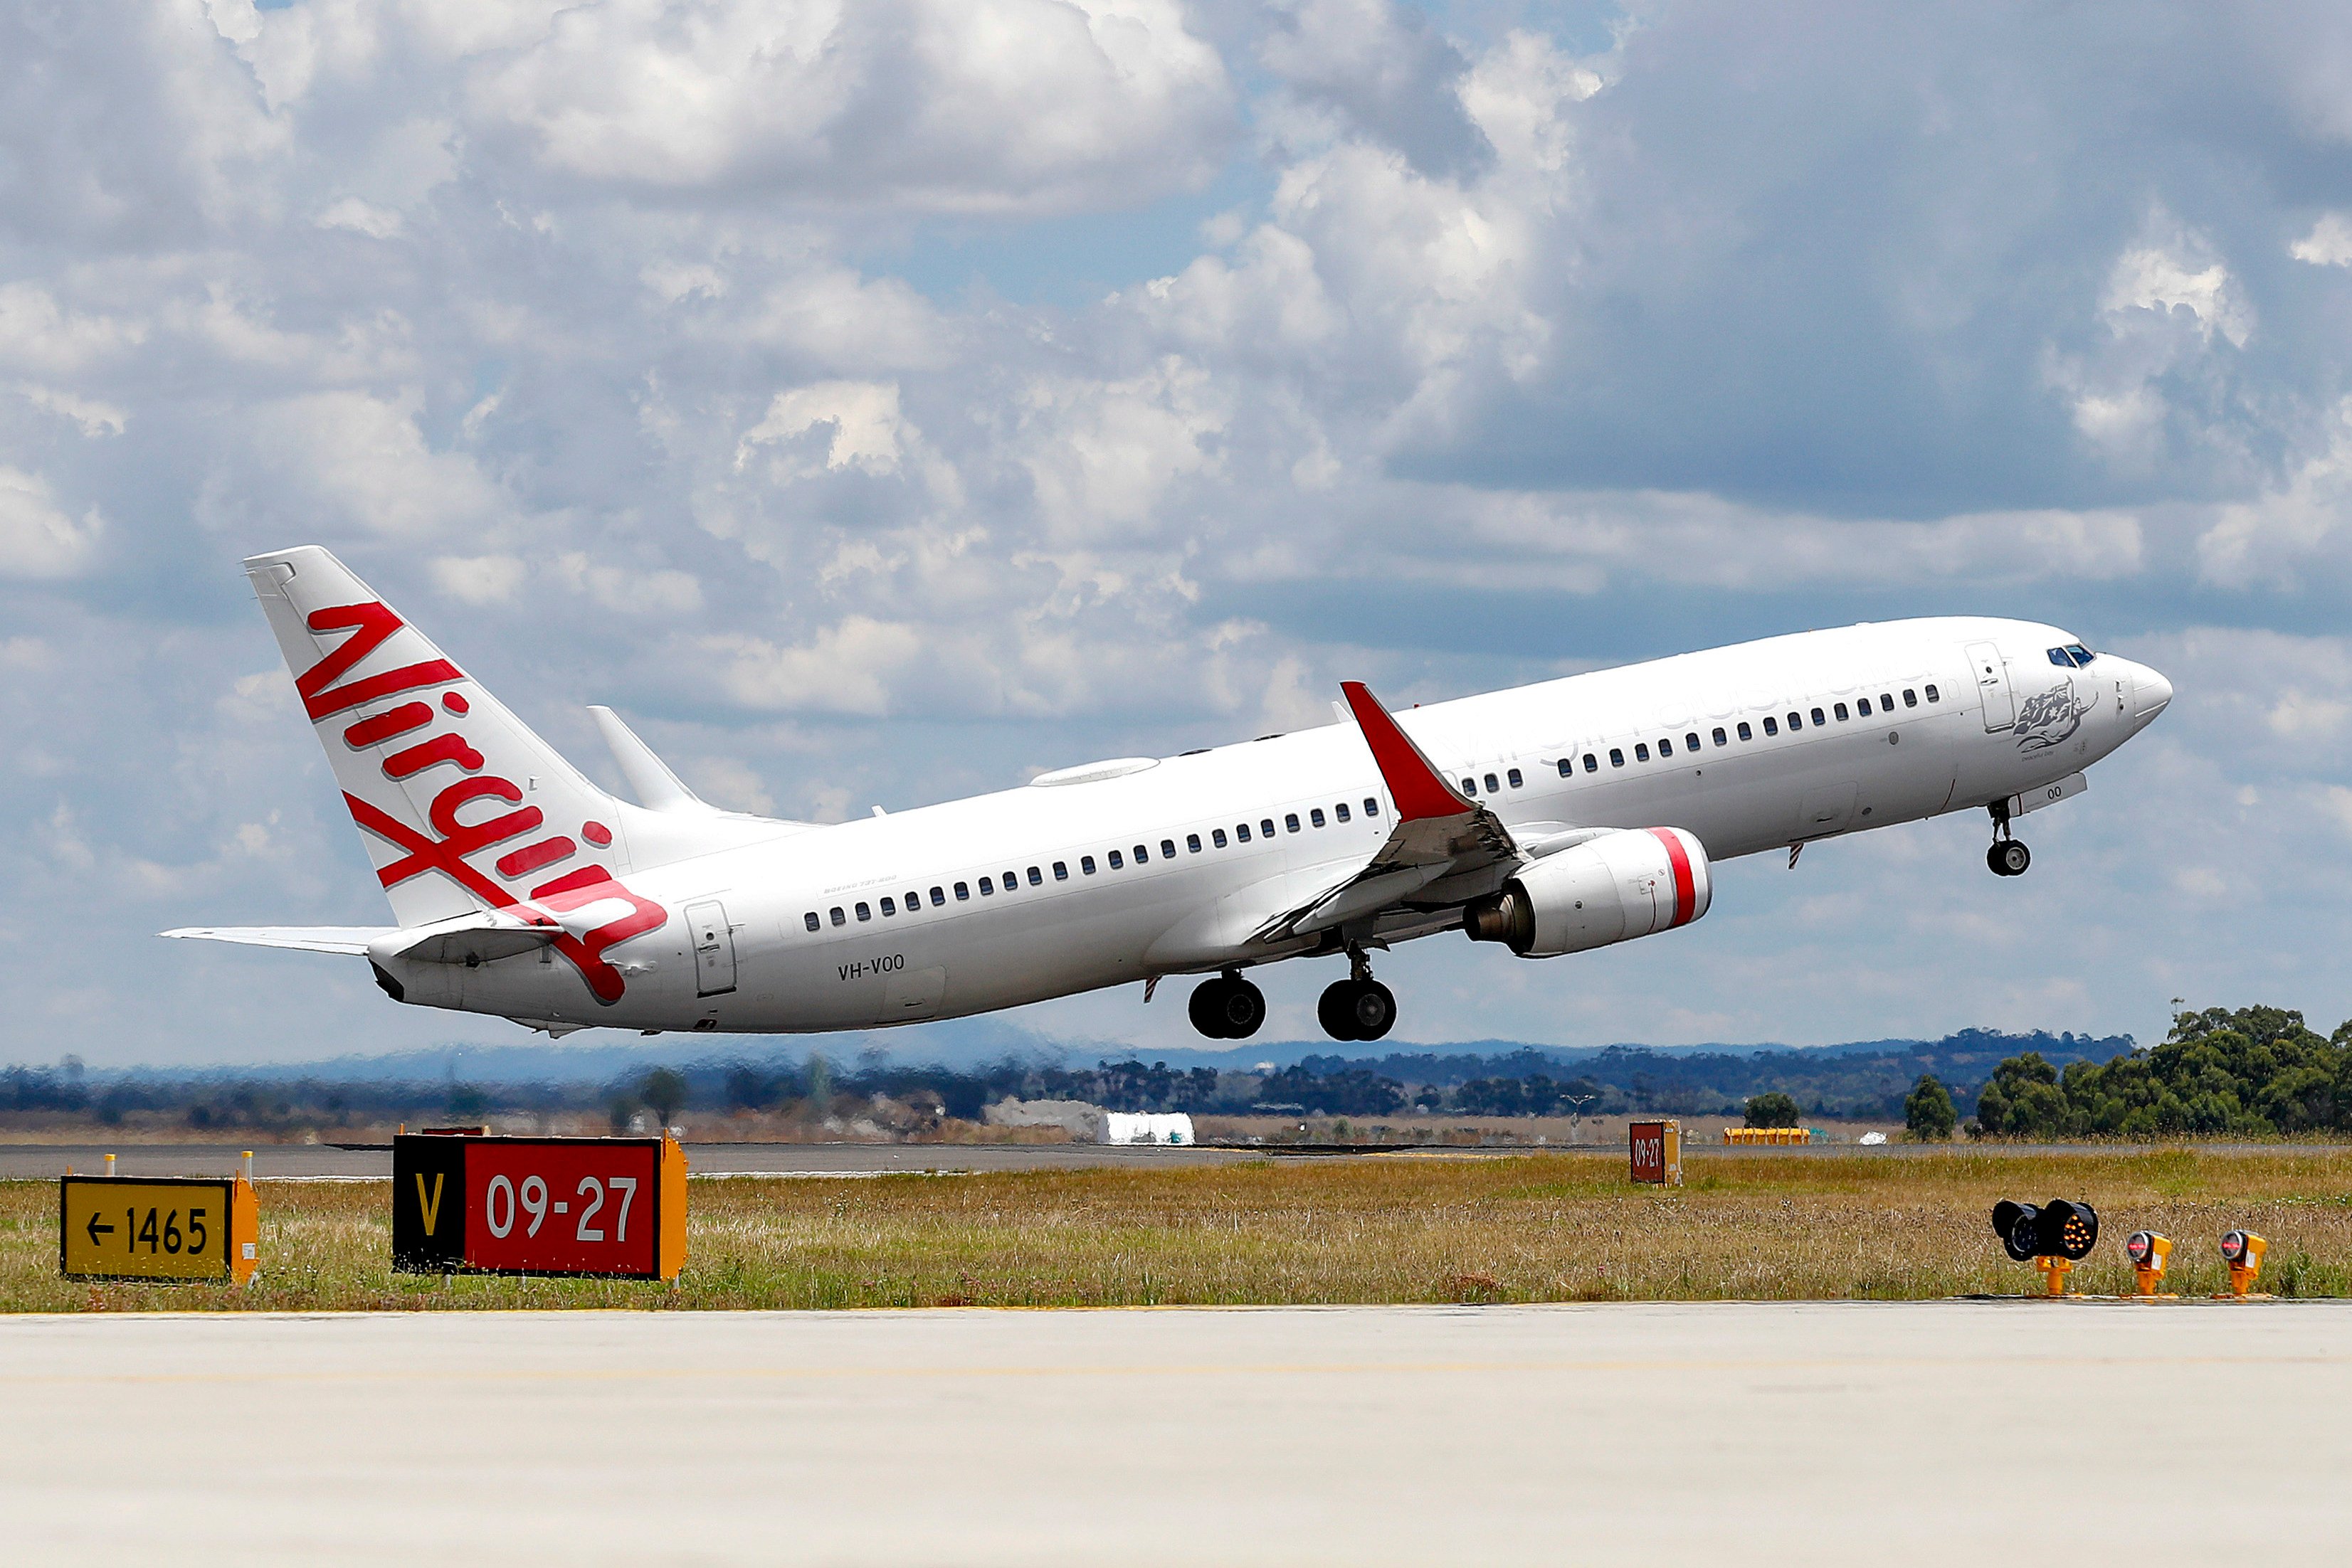 A man accused of running naked down the aisle of an Australian domestic flight, knocking down a flight attendant and forcing the plane to turn back, has been arrested. Photo: AP